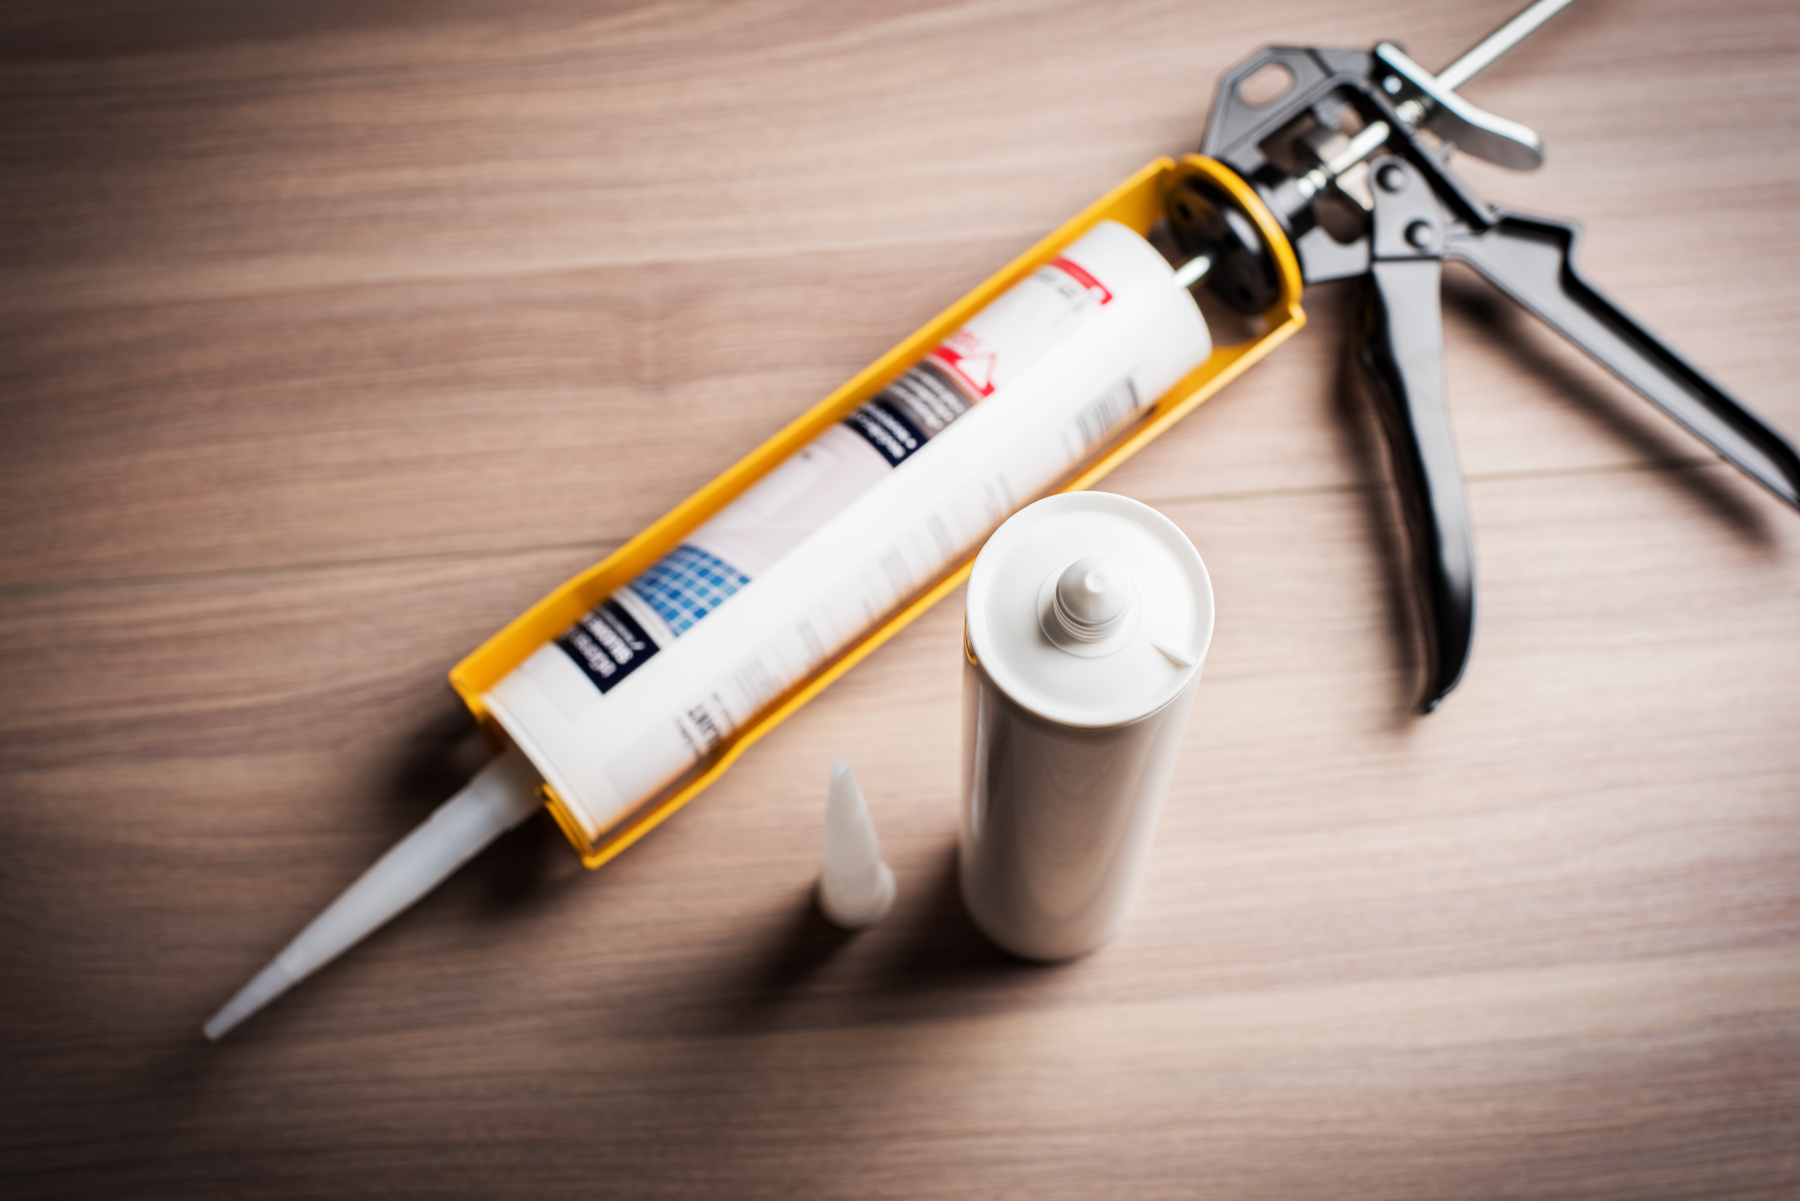 Caulking guns are lightweight and always useful for weatherproofing